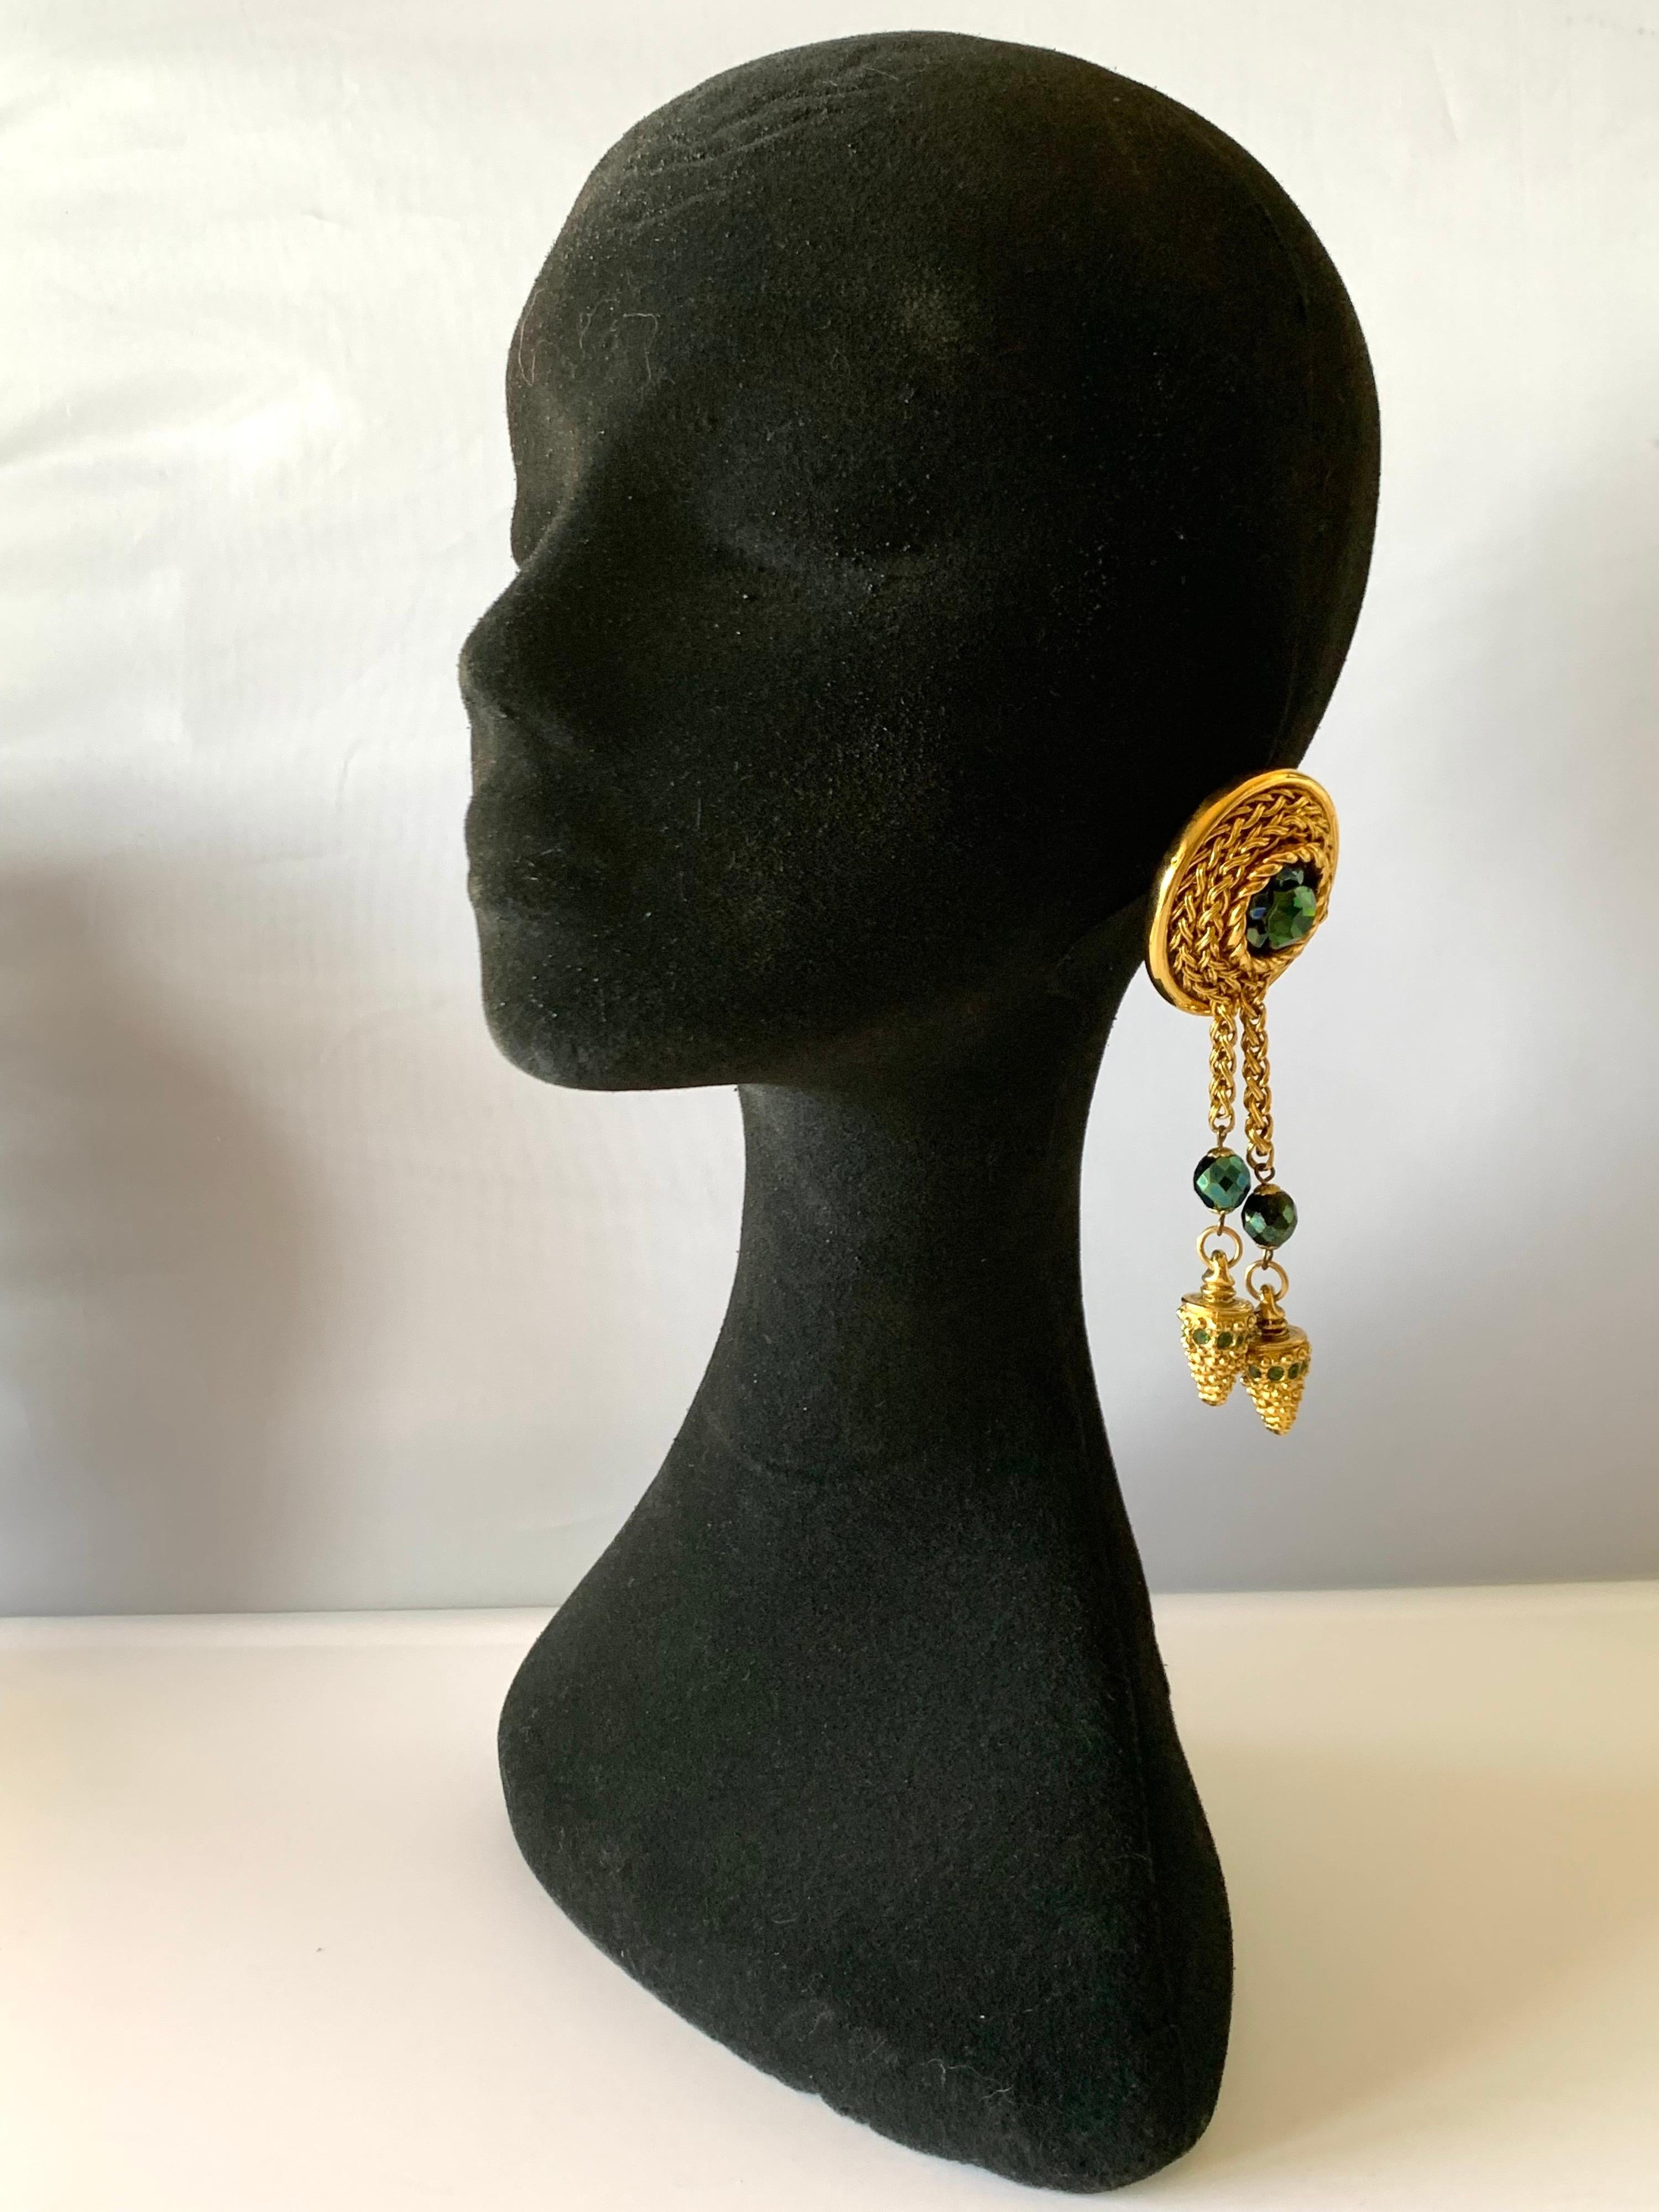 Sensational vintage gilt knotted French statement clip-on earrings circa 1980 - comprised of gilt metal segments encrusted with faux emerald stones and long tassels, signed Claire Deve, Paris. The illustrious designer also designed pieces for